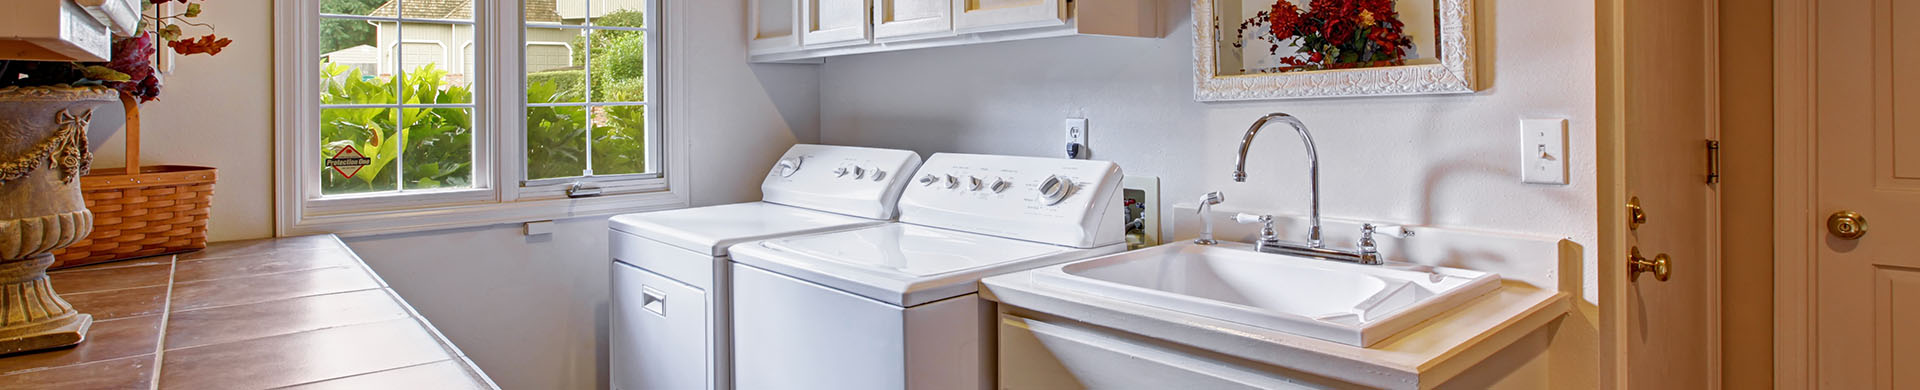 Washer and Dryer and Sink in a Small Laundry Room